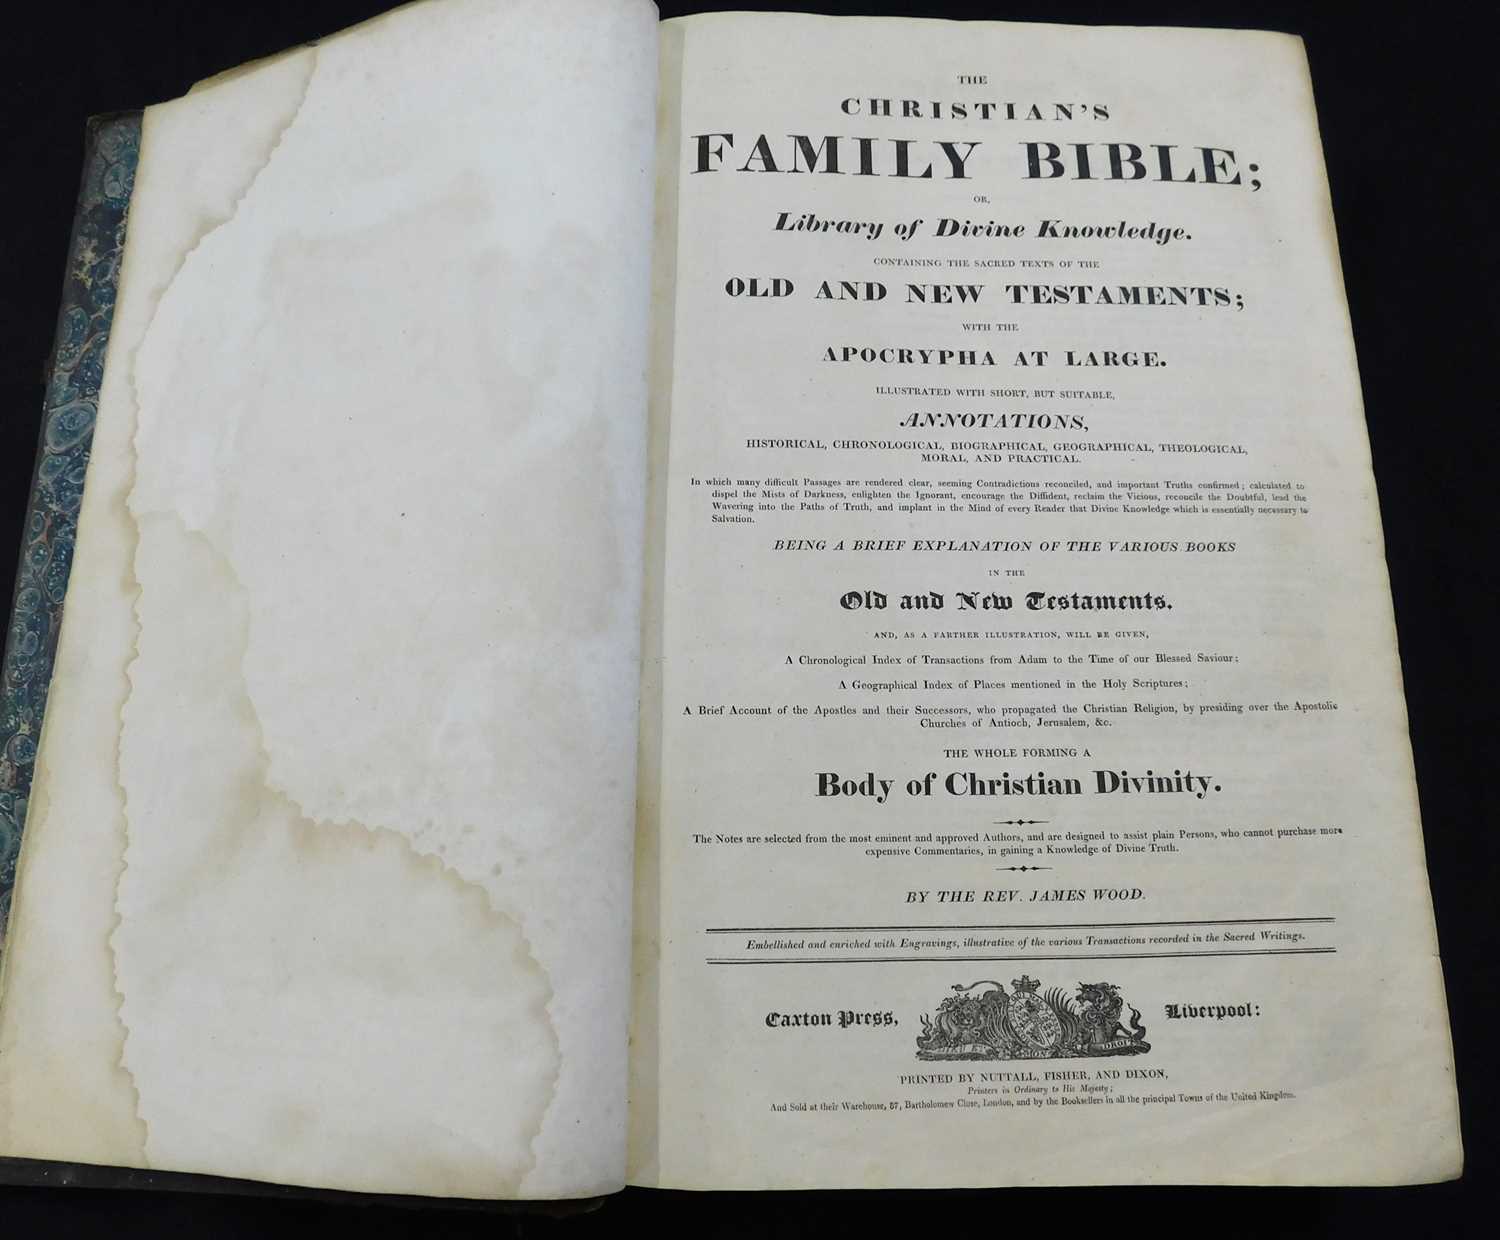 THE CHRISTIANS FAMILY BIBLE..., ed Rev James Wood, Liverpool, Caxton Press, 43 engraved plates, 4